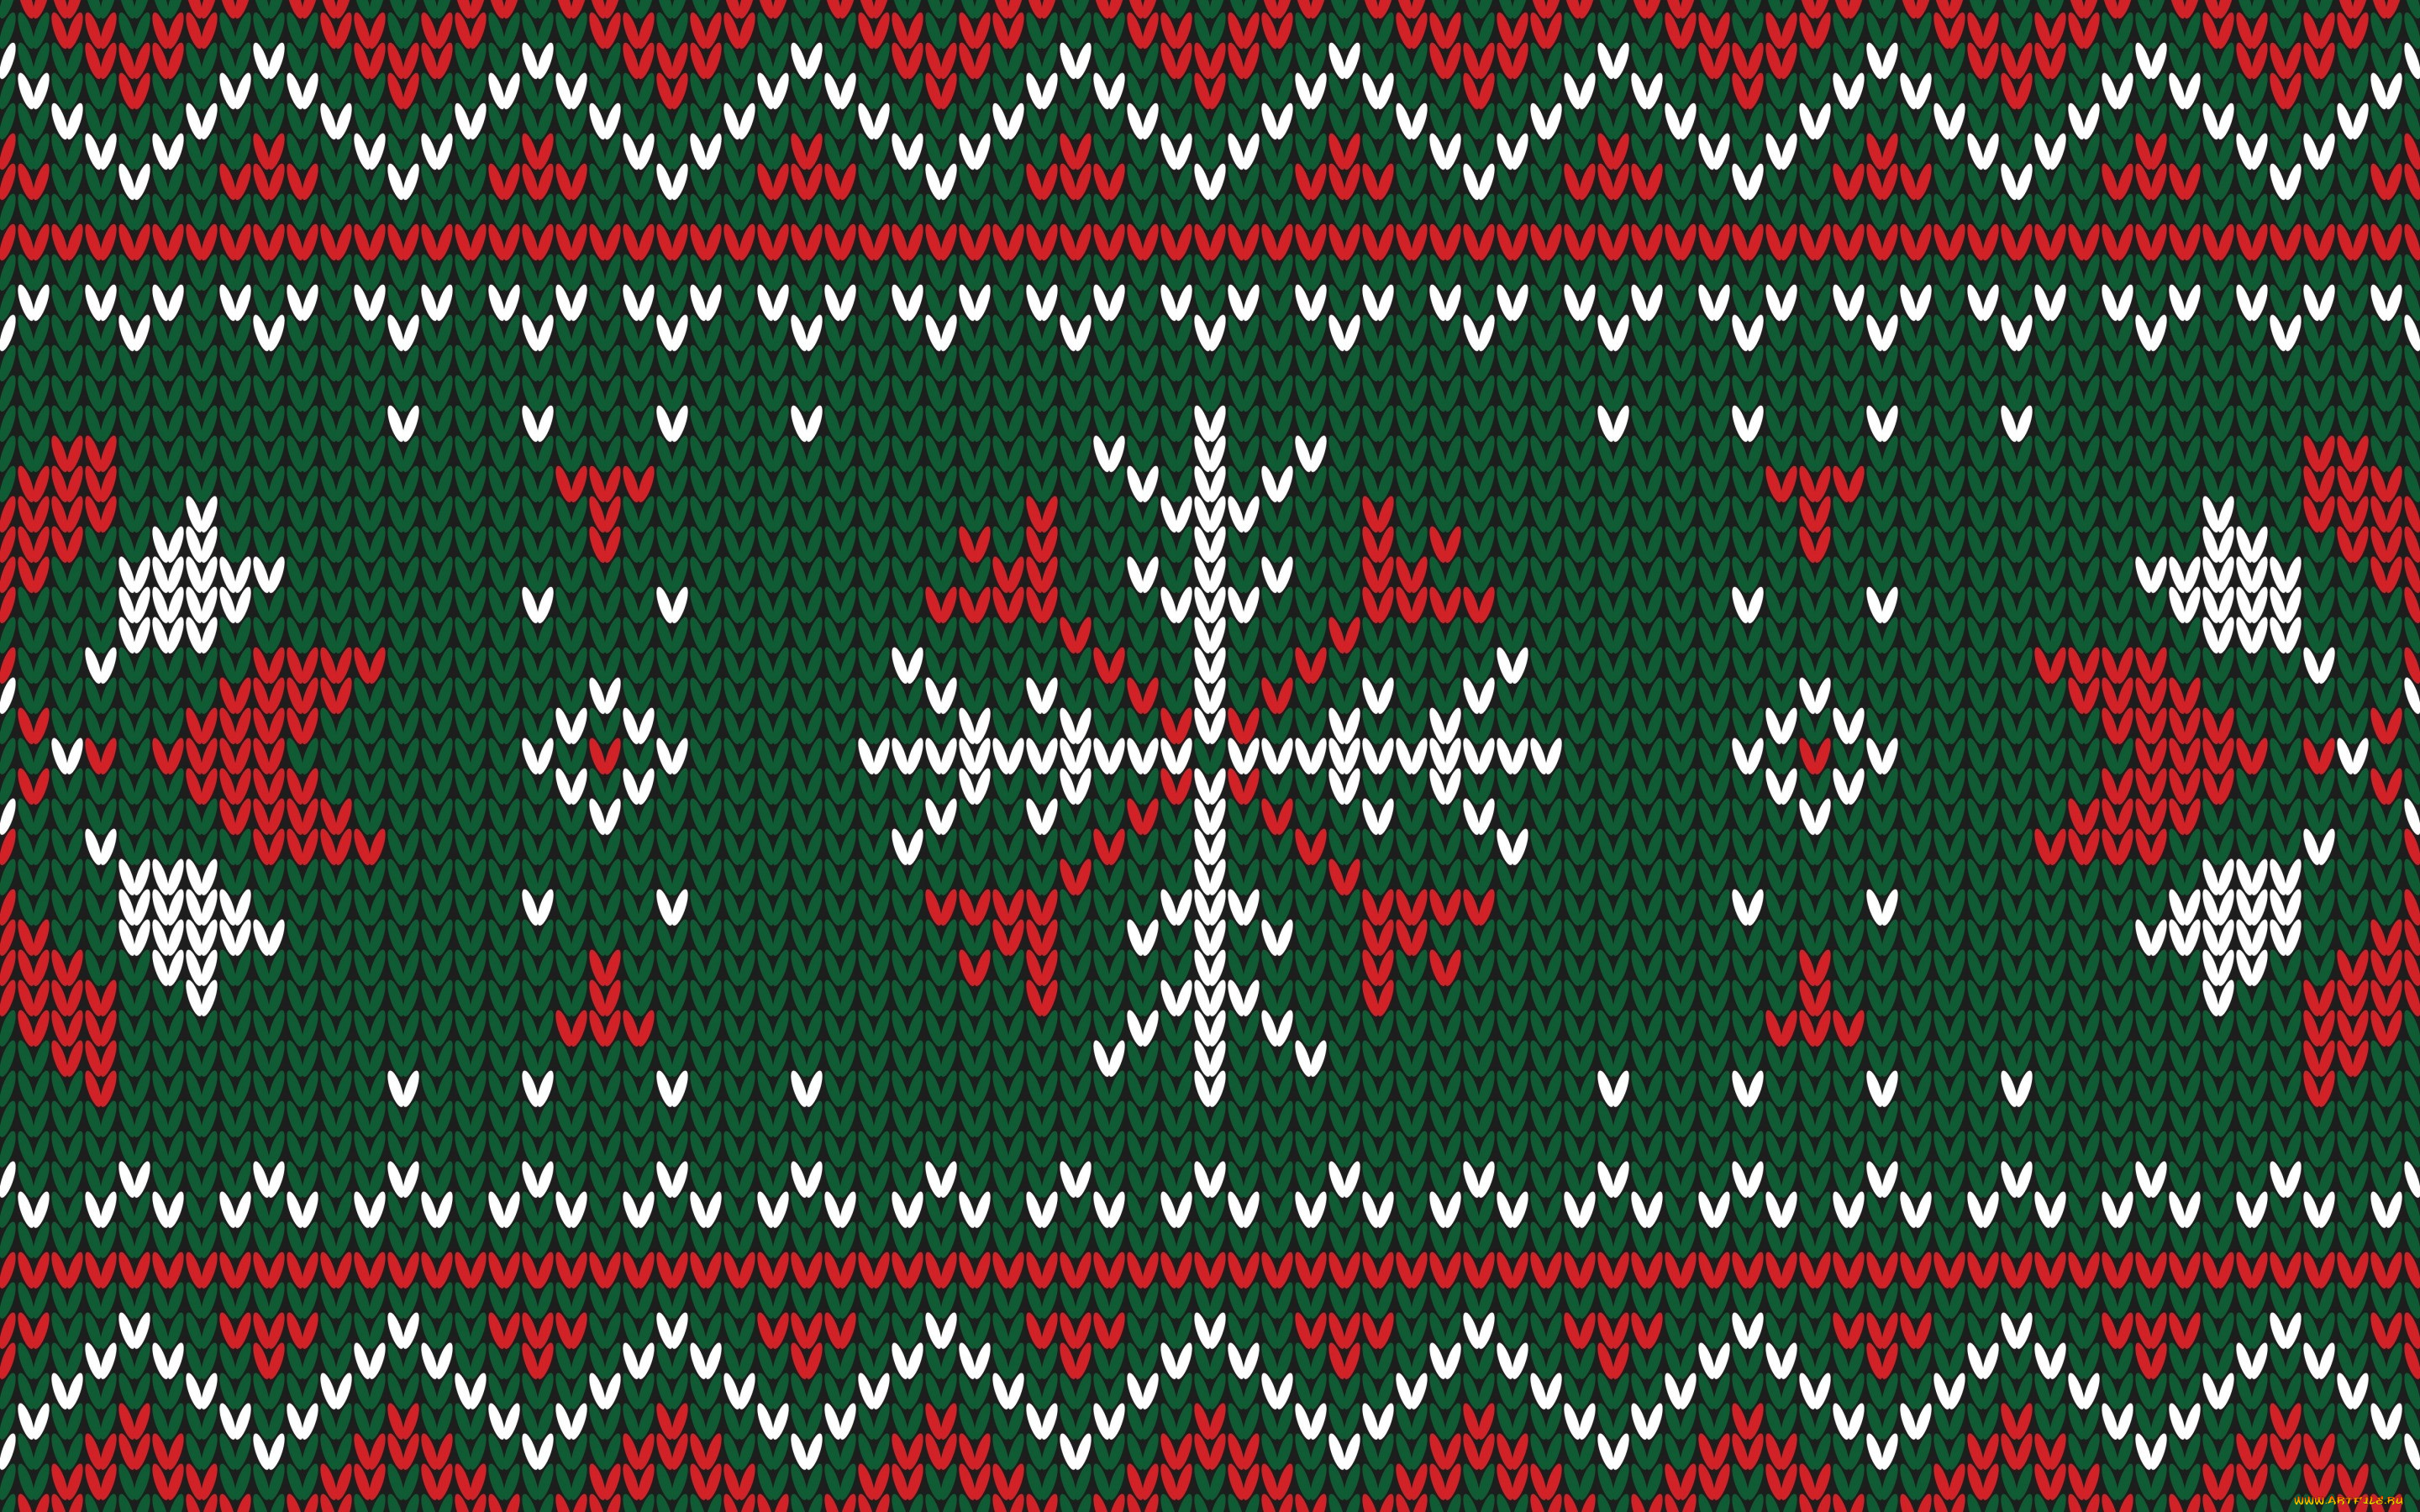  , - , graphics, , pattern, background, winter, seamles, knitted